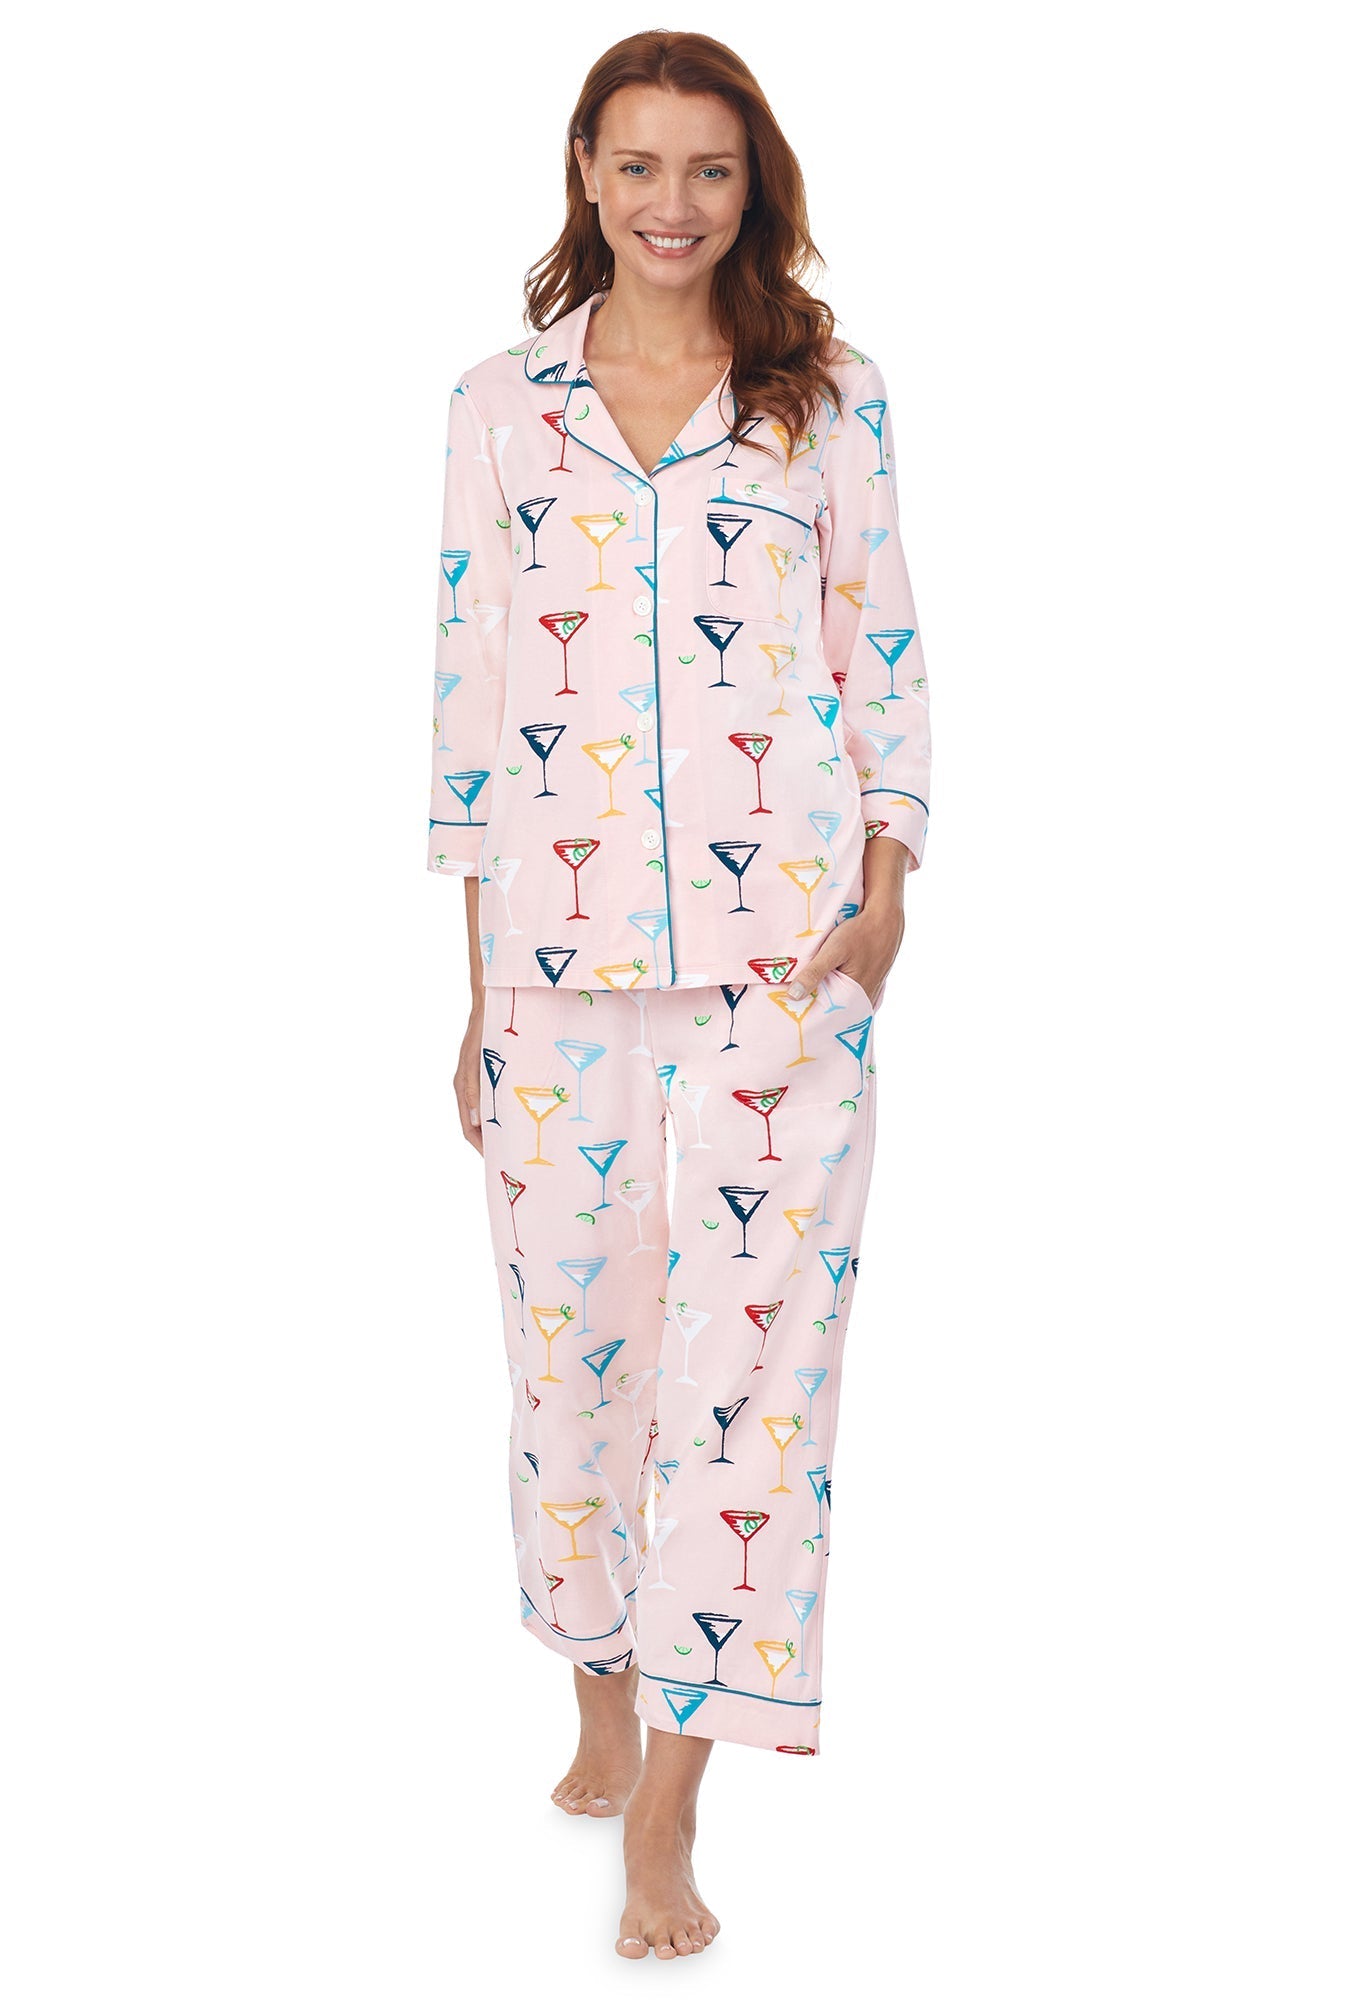 A lady wearing a pink quarter sleeve cropped pj set with glass pattern.